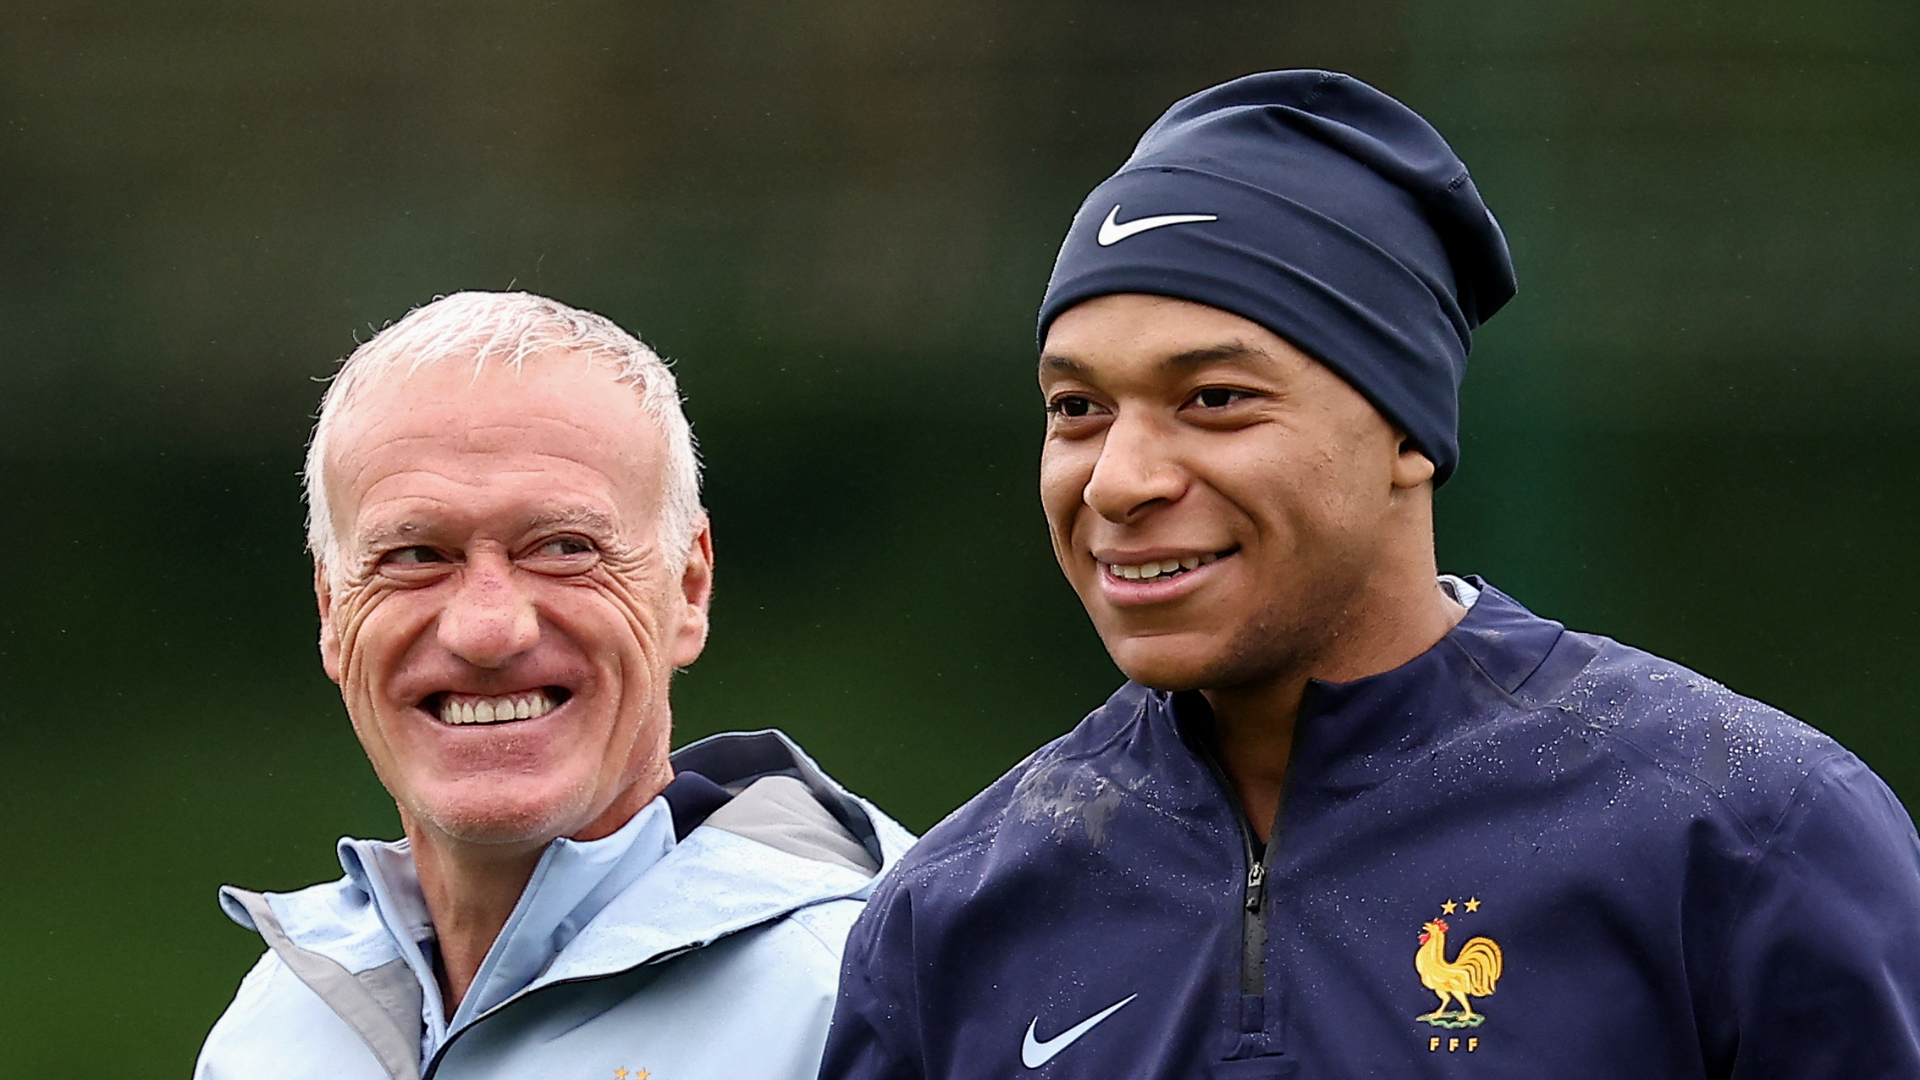 Kylian Mbappe and Didier Deschamps (Photo by FRANCK FIFE/AFP via Getty Images)